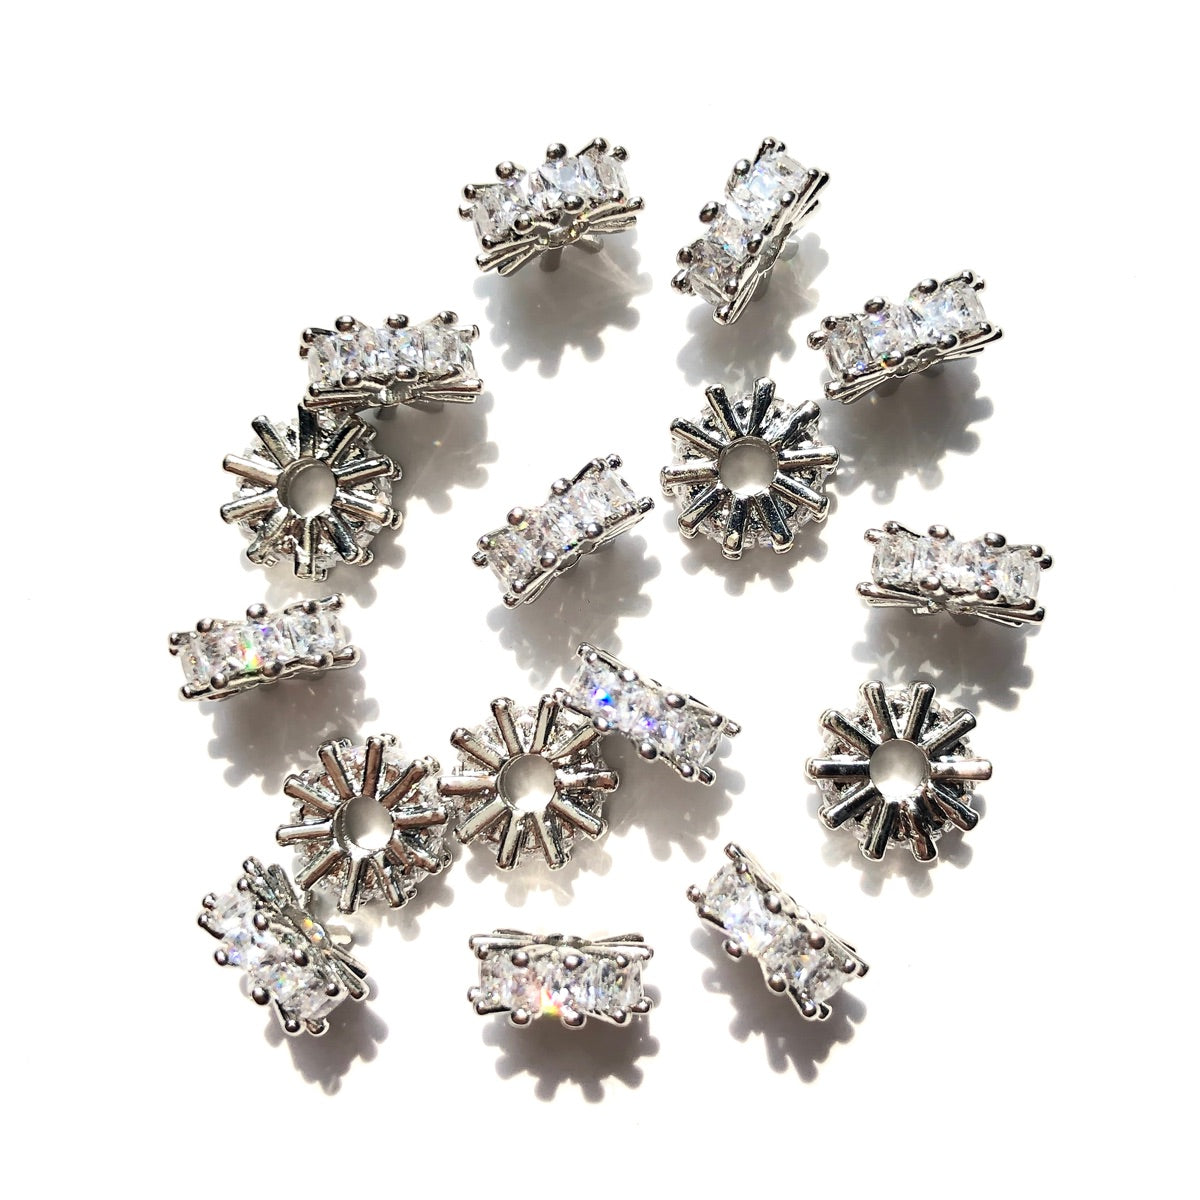 20-50pcs/lot 8.6mm Square CZ Paved Rondelle Wheel Spacers Silver CZ Paved Spacers New Spacers Arrivals Rondelle Beads Wholesale Charms Beads Beyond